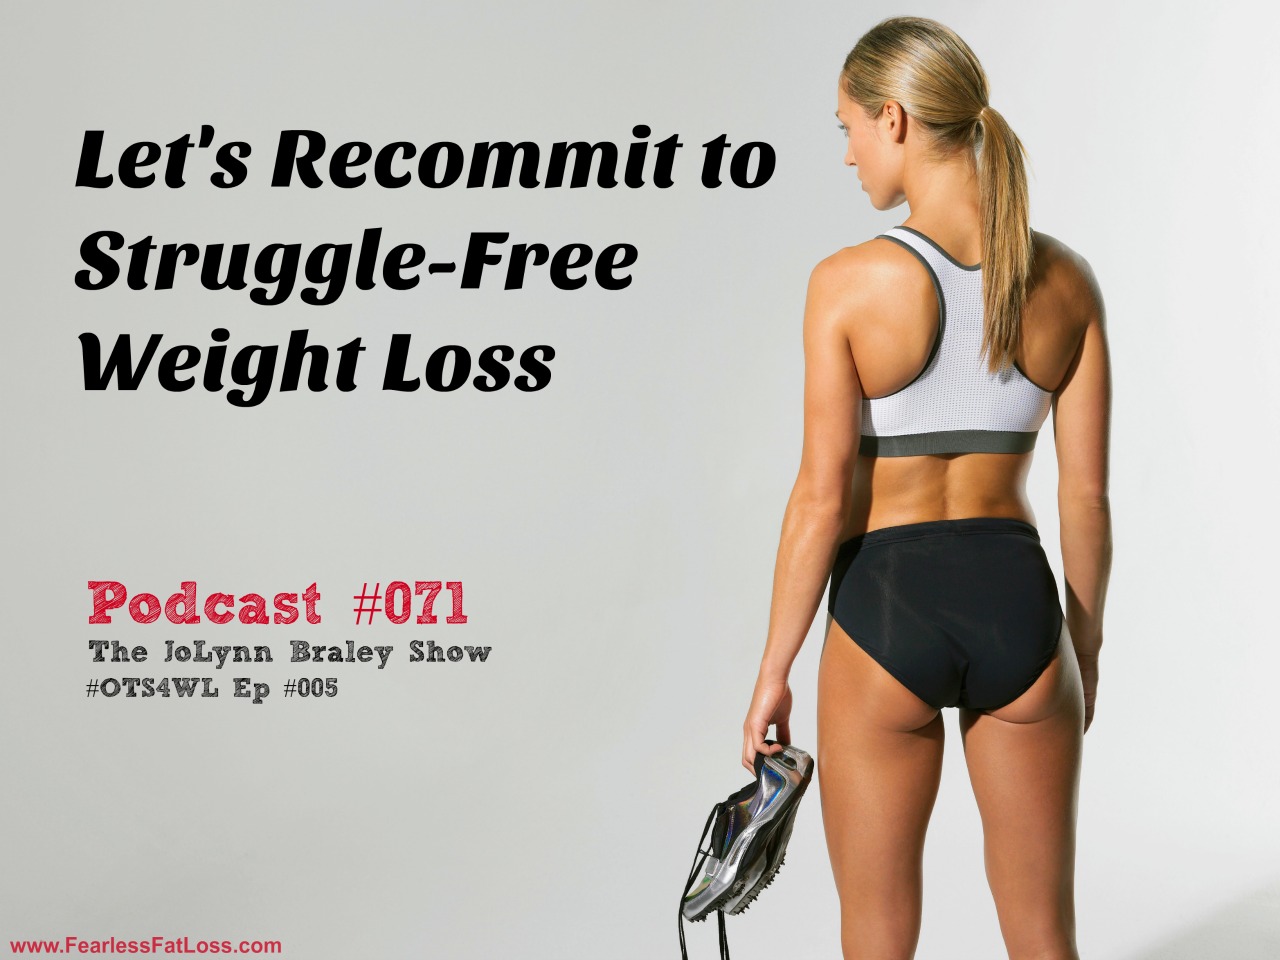 Let's Recommit To Struggle Free Weight Loss | FREE Weight Loss Podcast | The JoLynn Braley Show | FearlessFatLoss.com